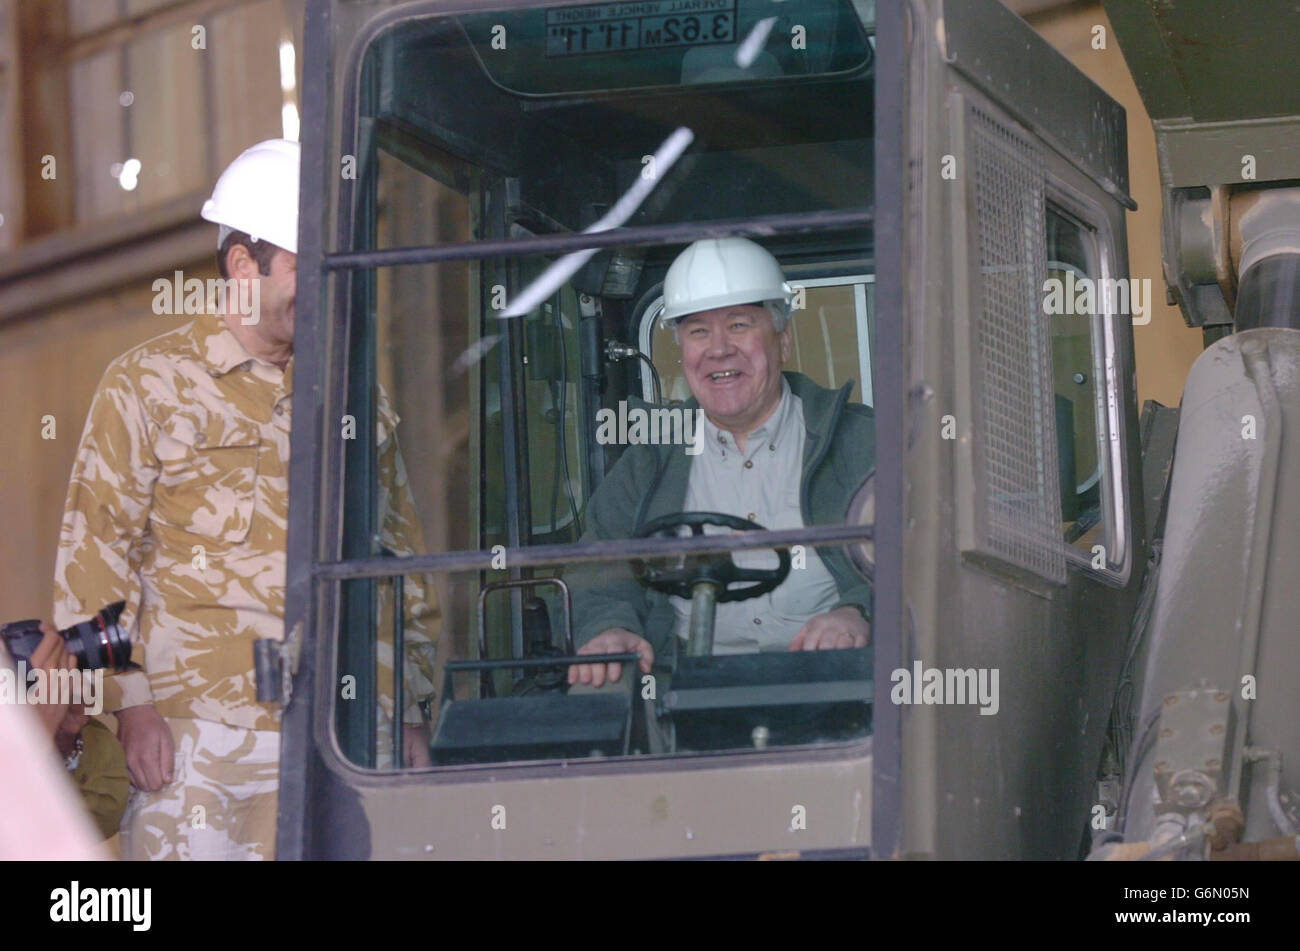 Armed Forces Minister Adam Ingram sits behind the wheel of some lifting equipment during a visit to Shaibah Logistic Base. Ingram was joining Leader of the Opposition Michael Howard and shadow defence secretary Nicholas Soames for the last leg of a tour to raise troops' morale. Stock Photo